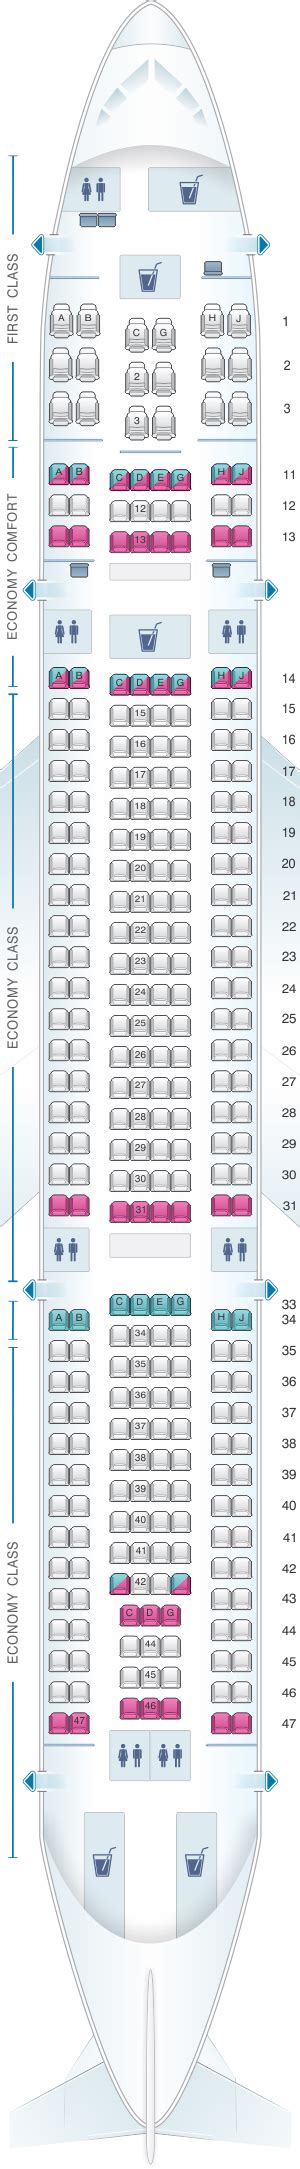 Airbus A Seat Map Hawaiian Two Birds Home